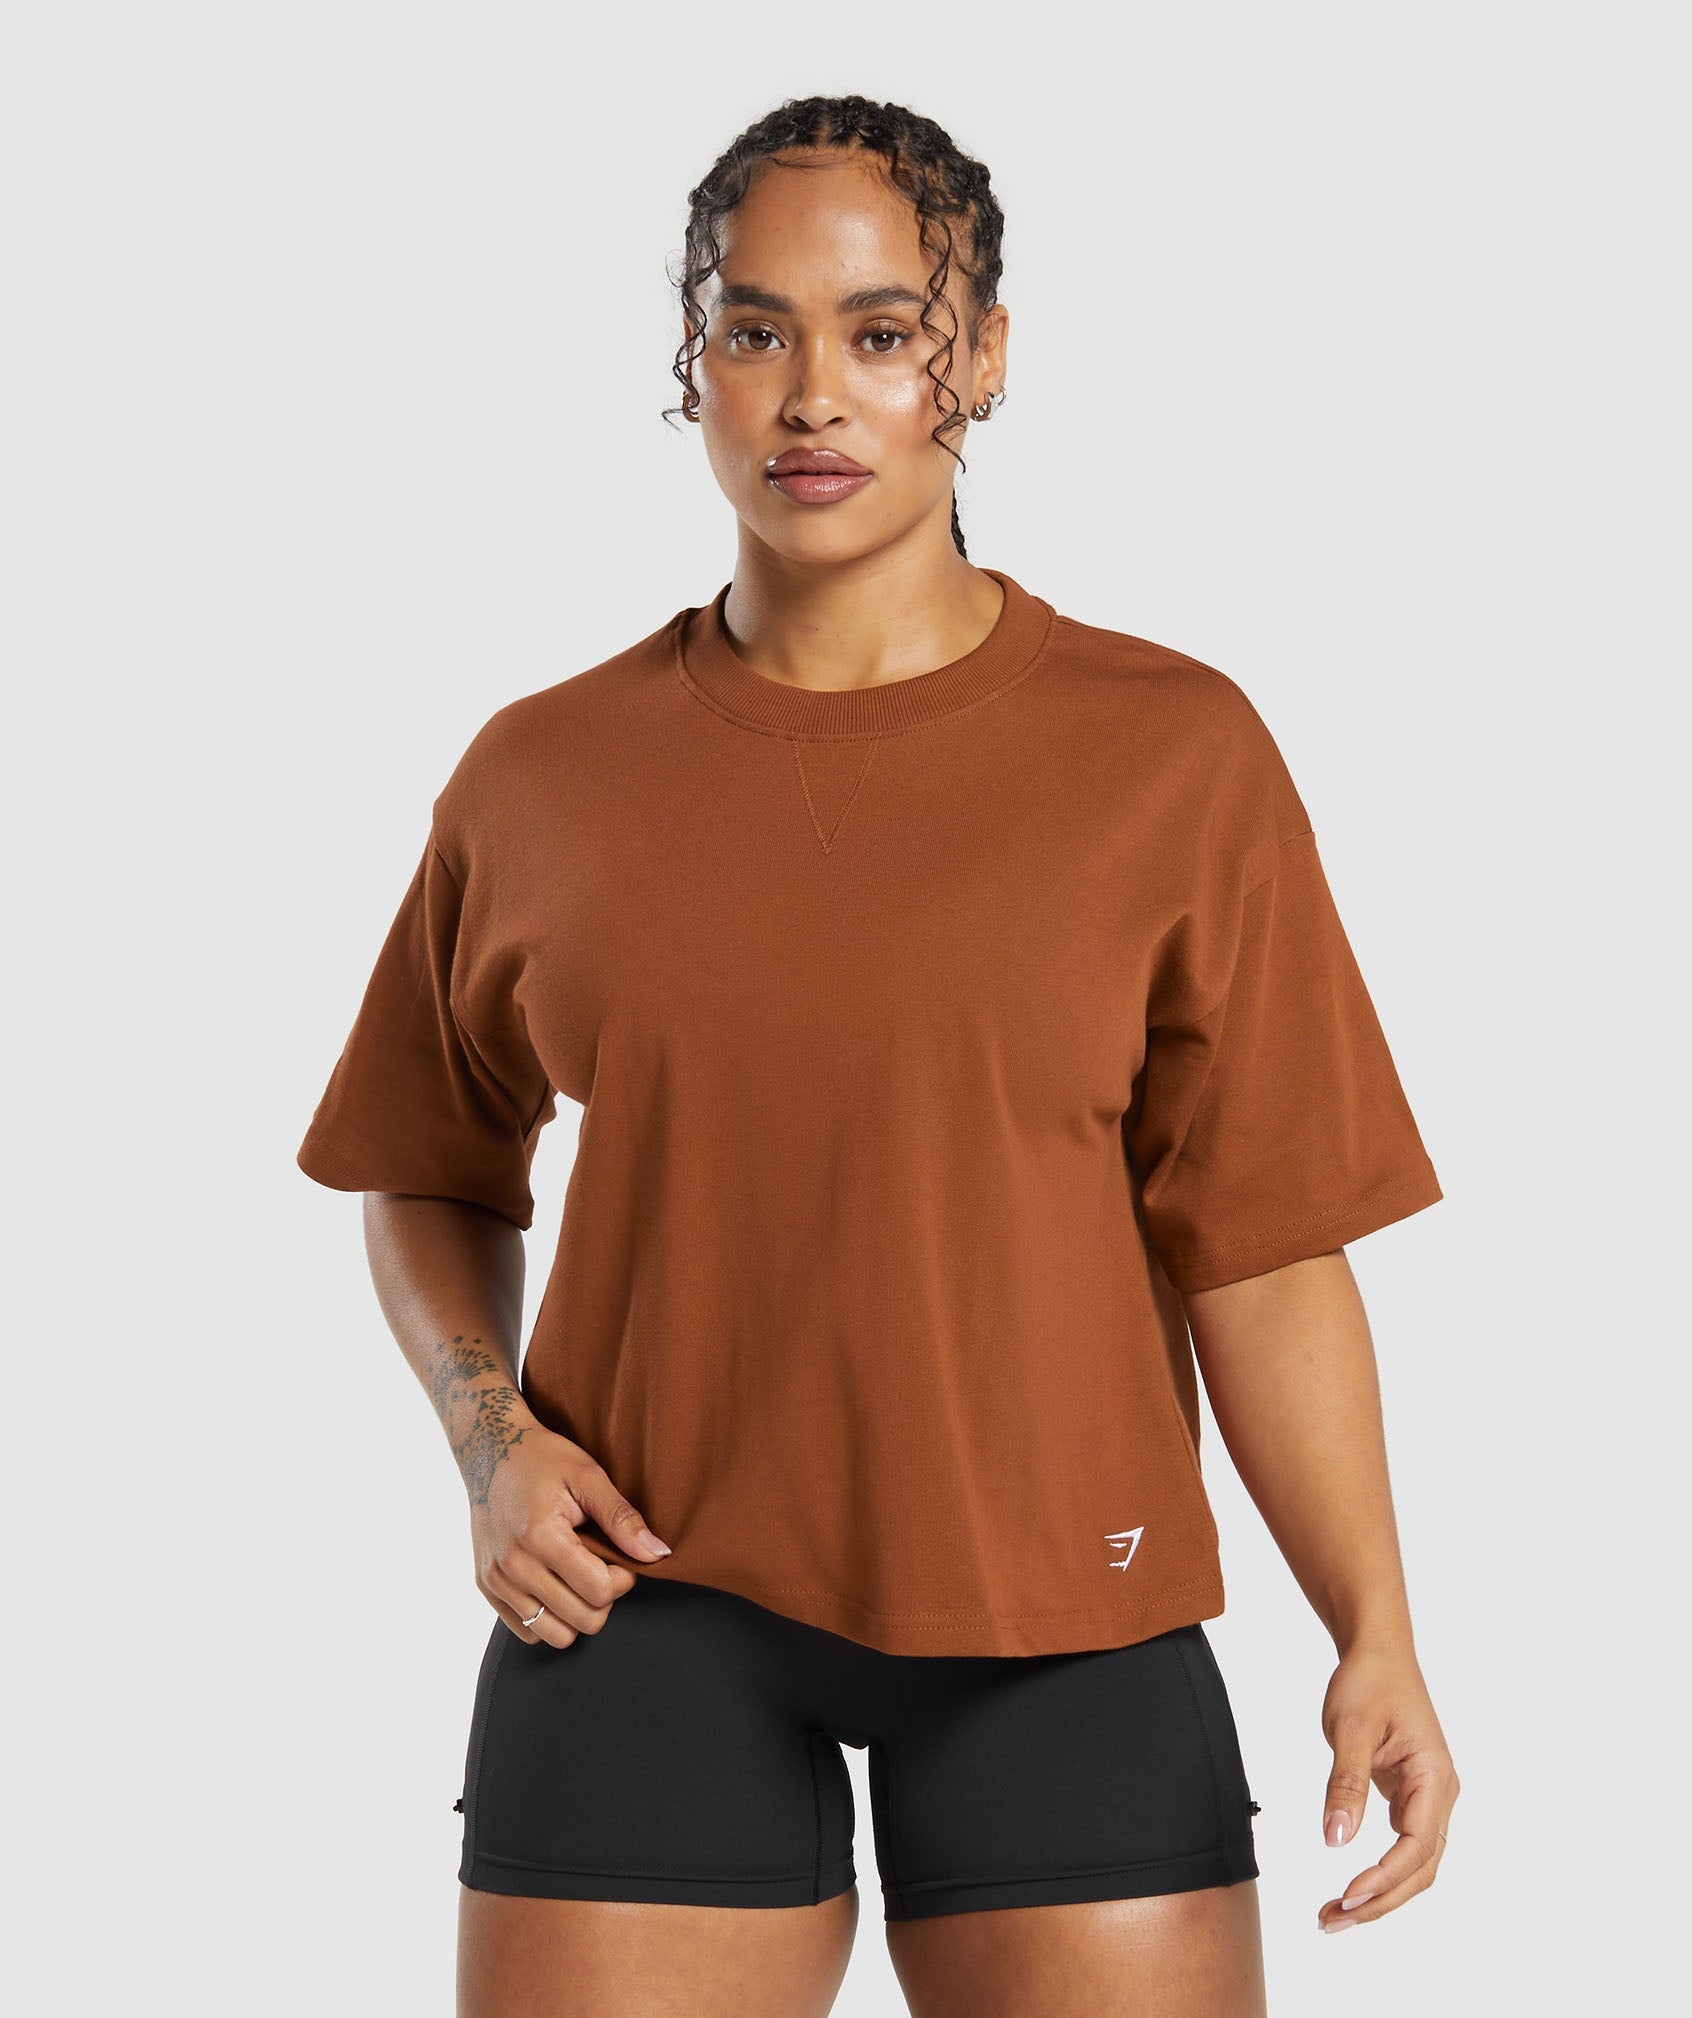 Heavyweight Cotton T-Shirt in Copper Brown